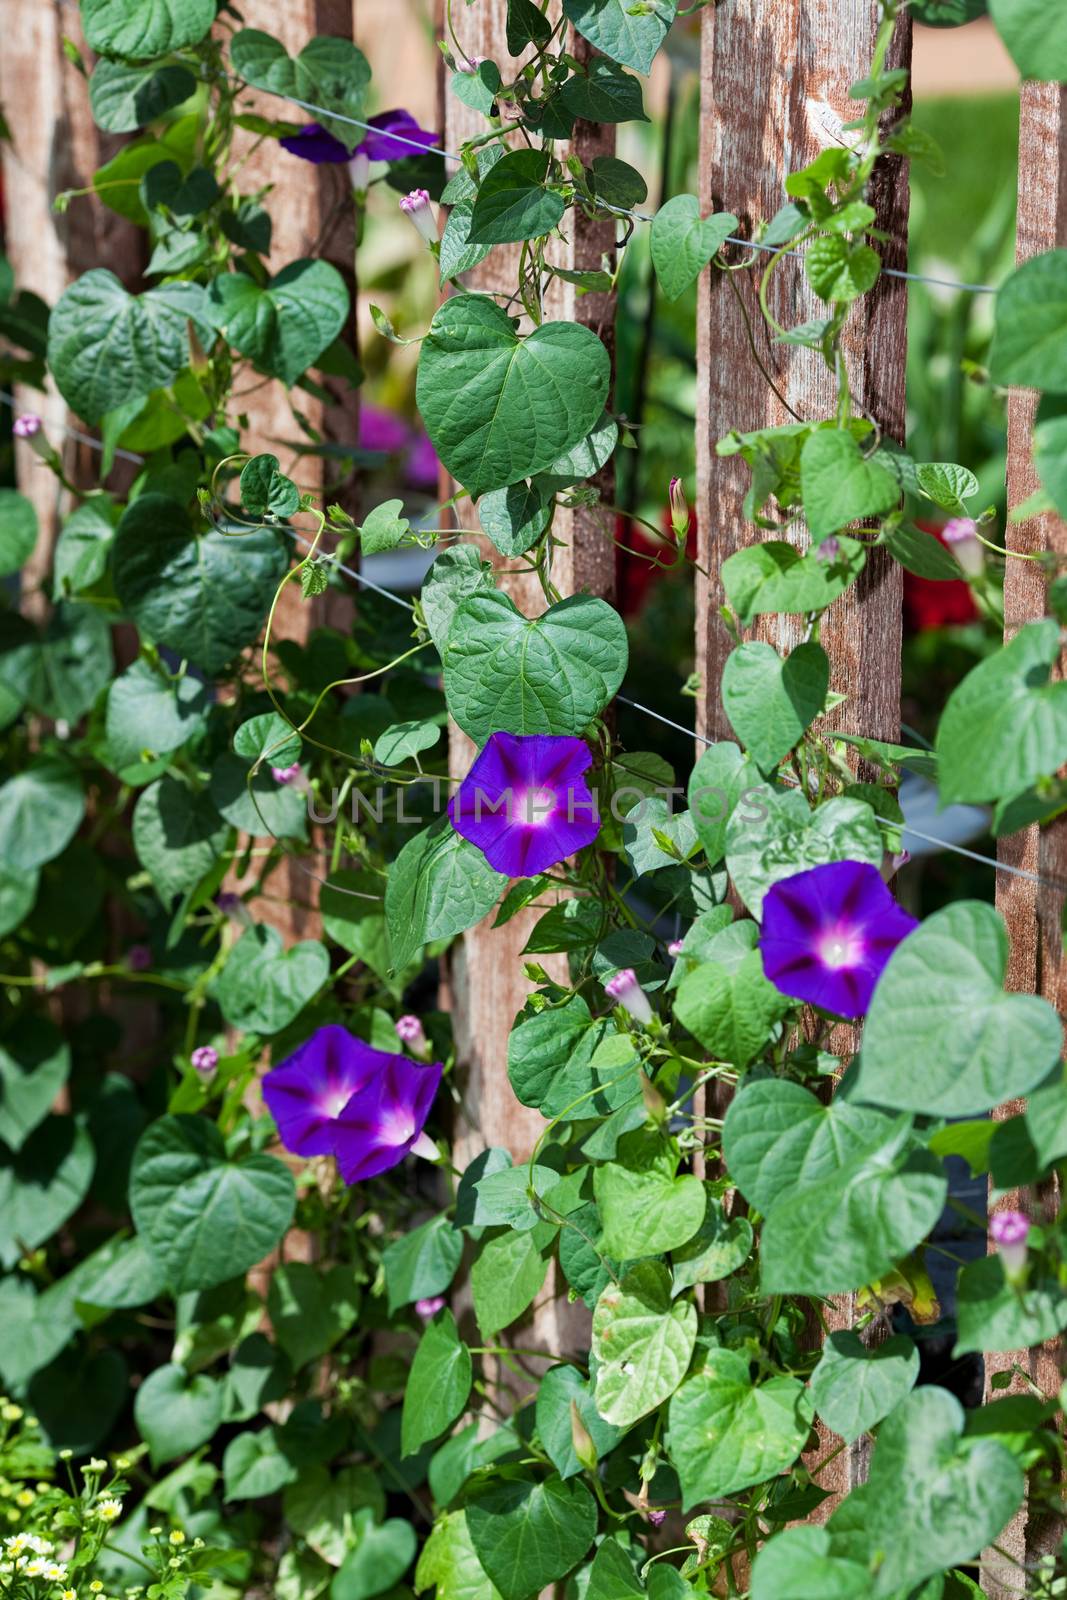 A beautiful hybrid variety of morning glories climbing up a fence on a sunny day.